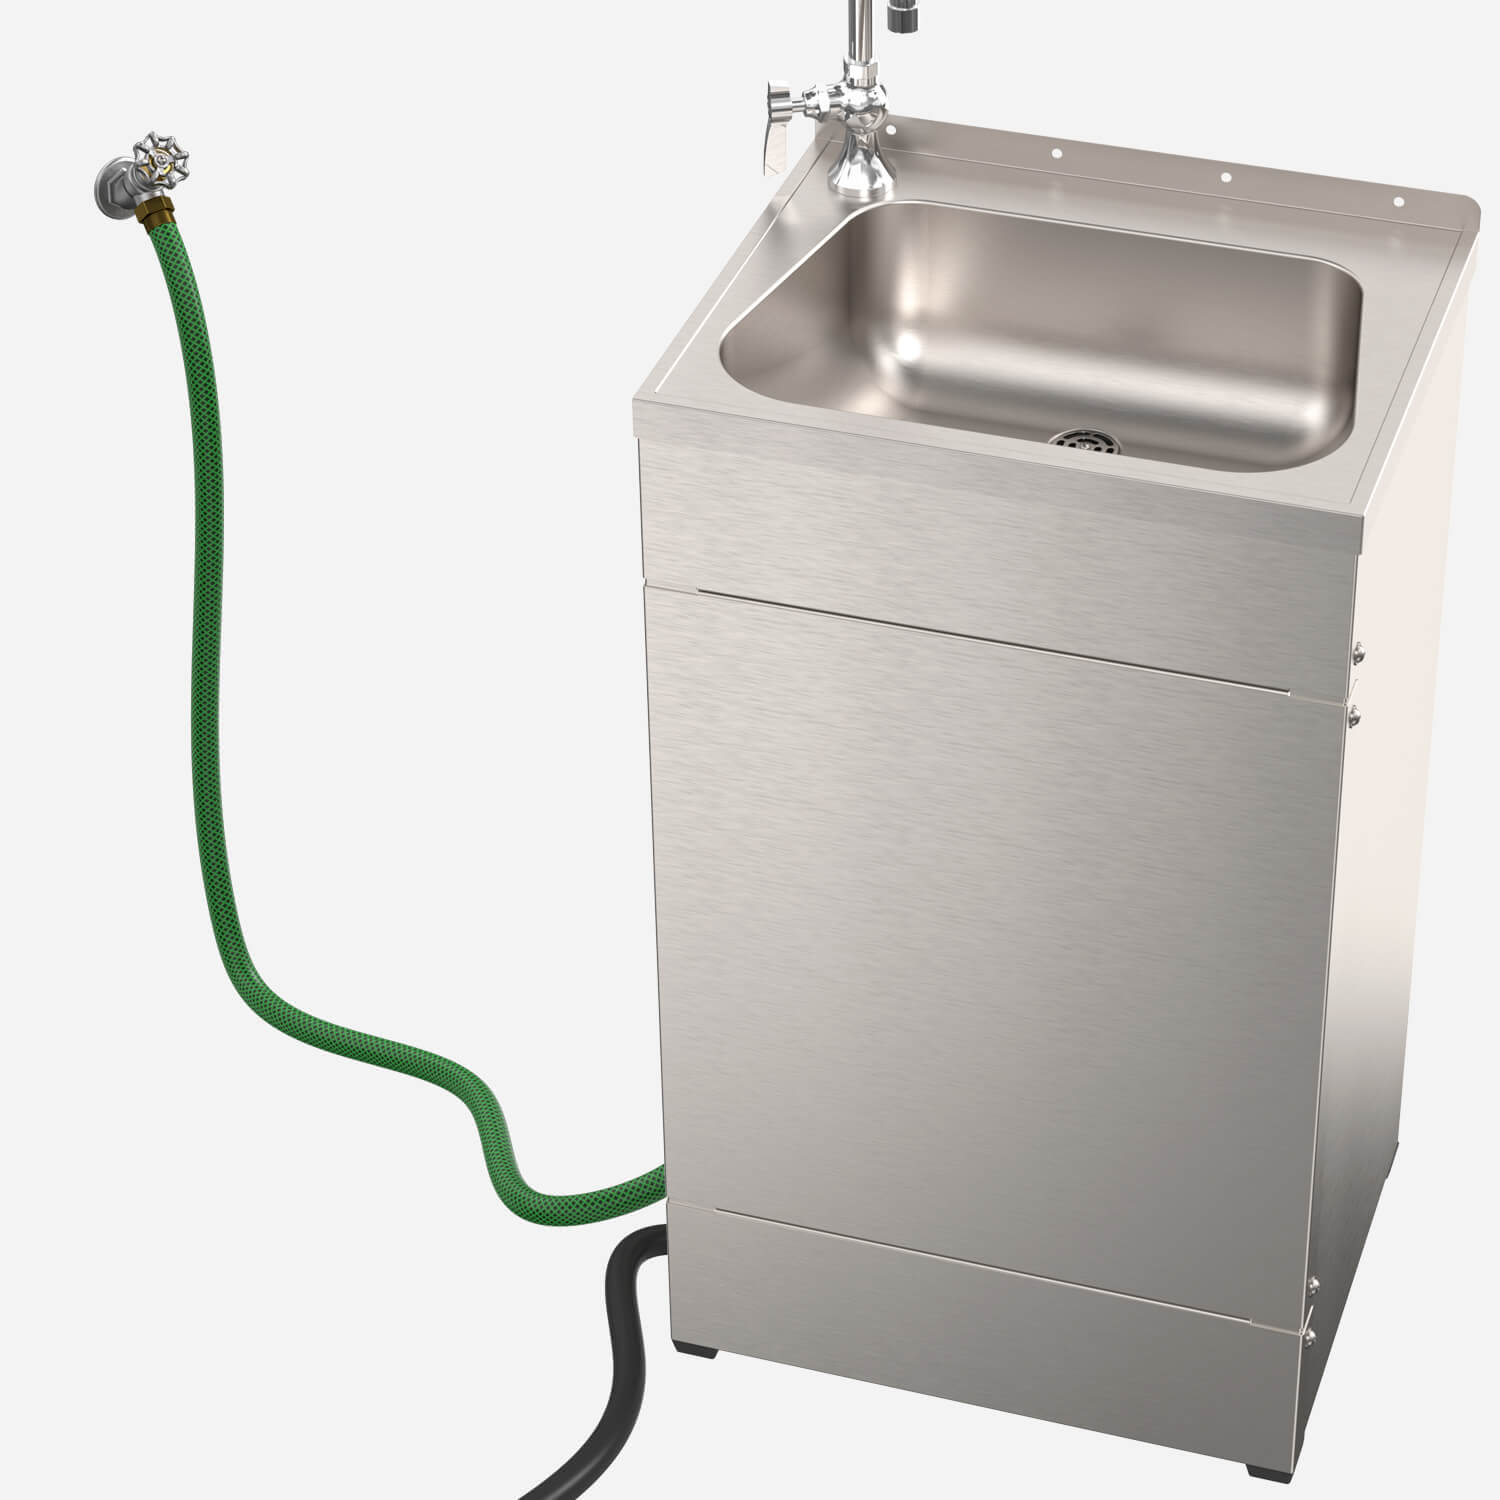 Portable Hand Washing Stations The Essential Plumbing Company Hands